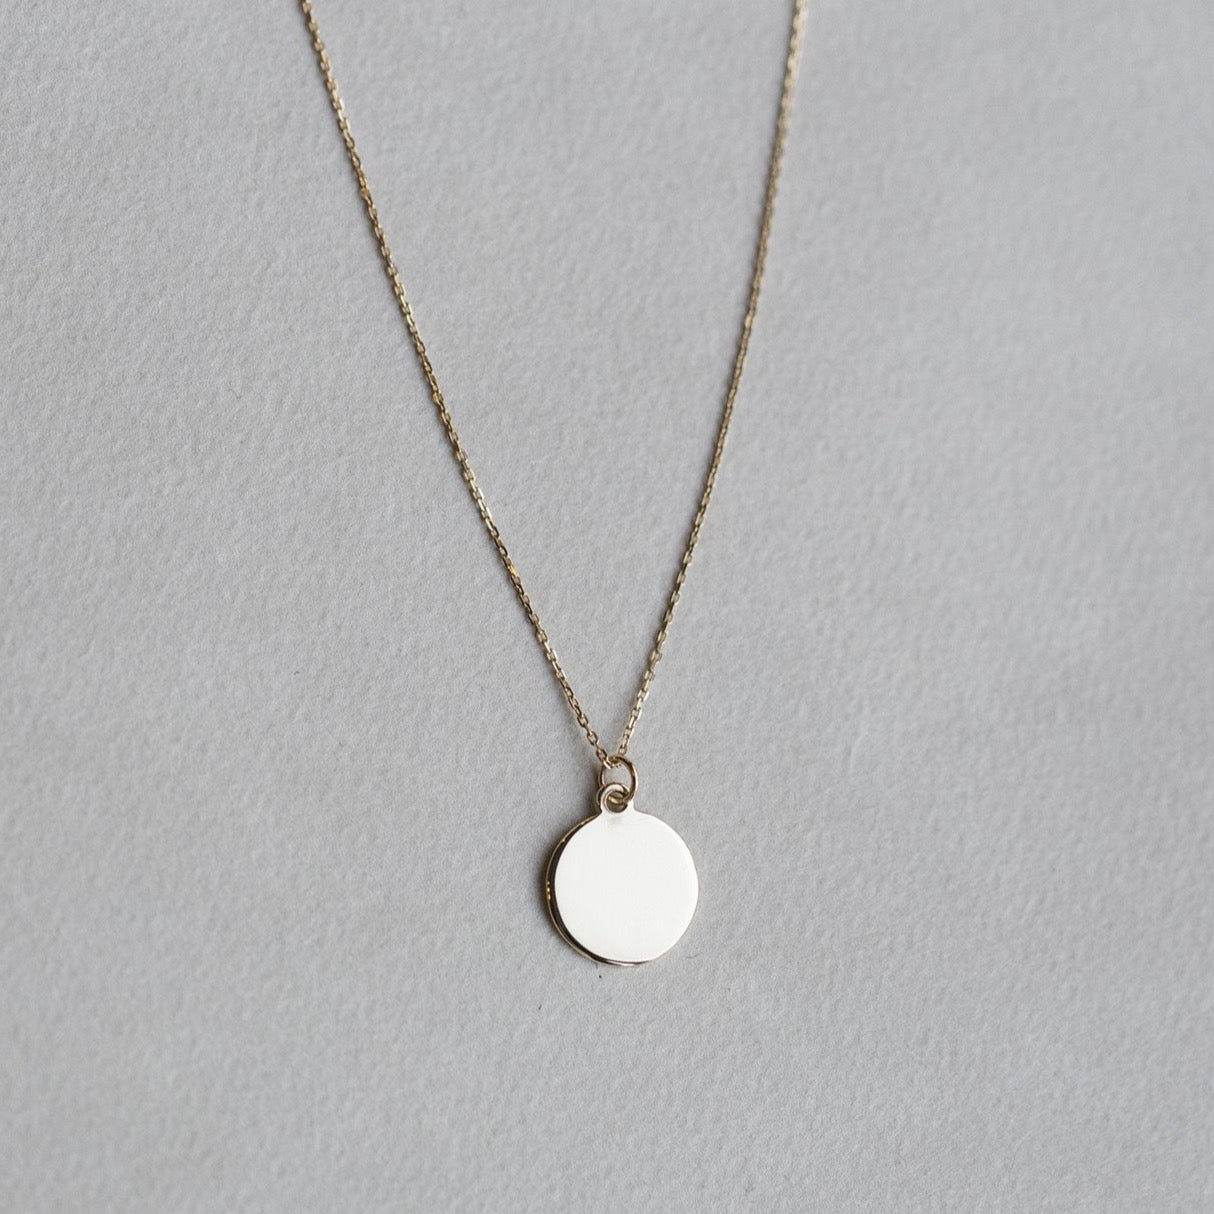 felt's own design - incredibly simple and enchanting polished gold disc 